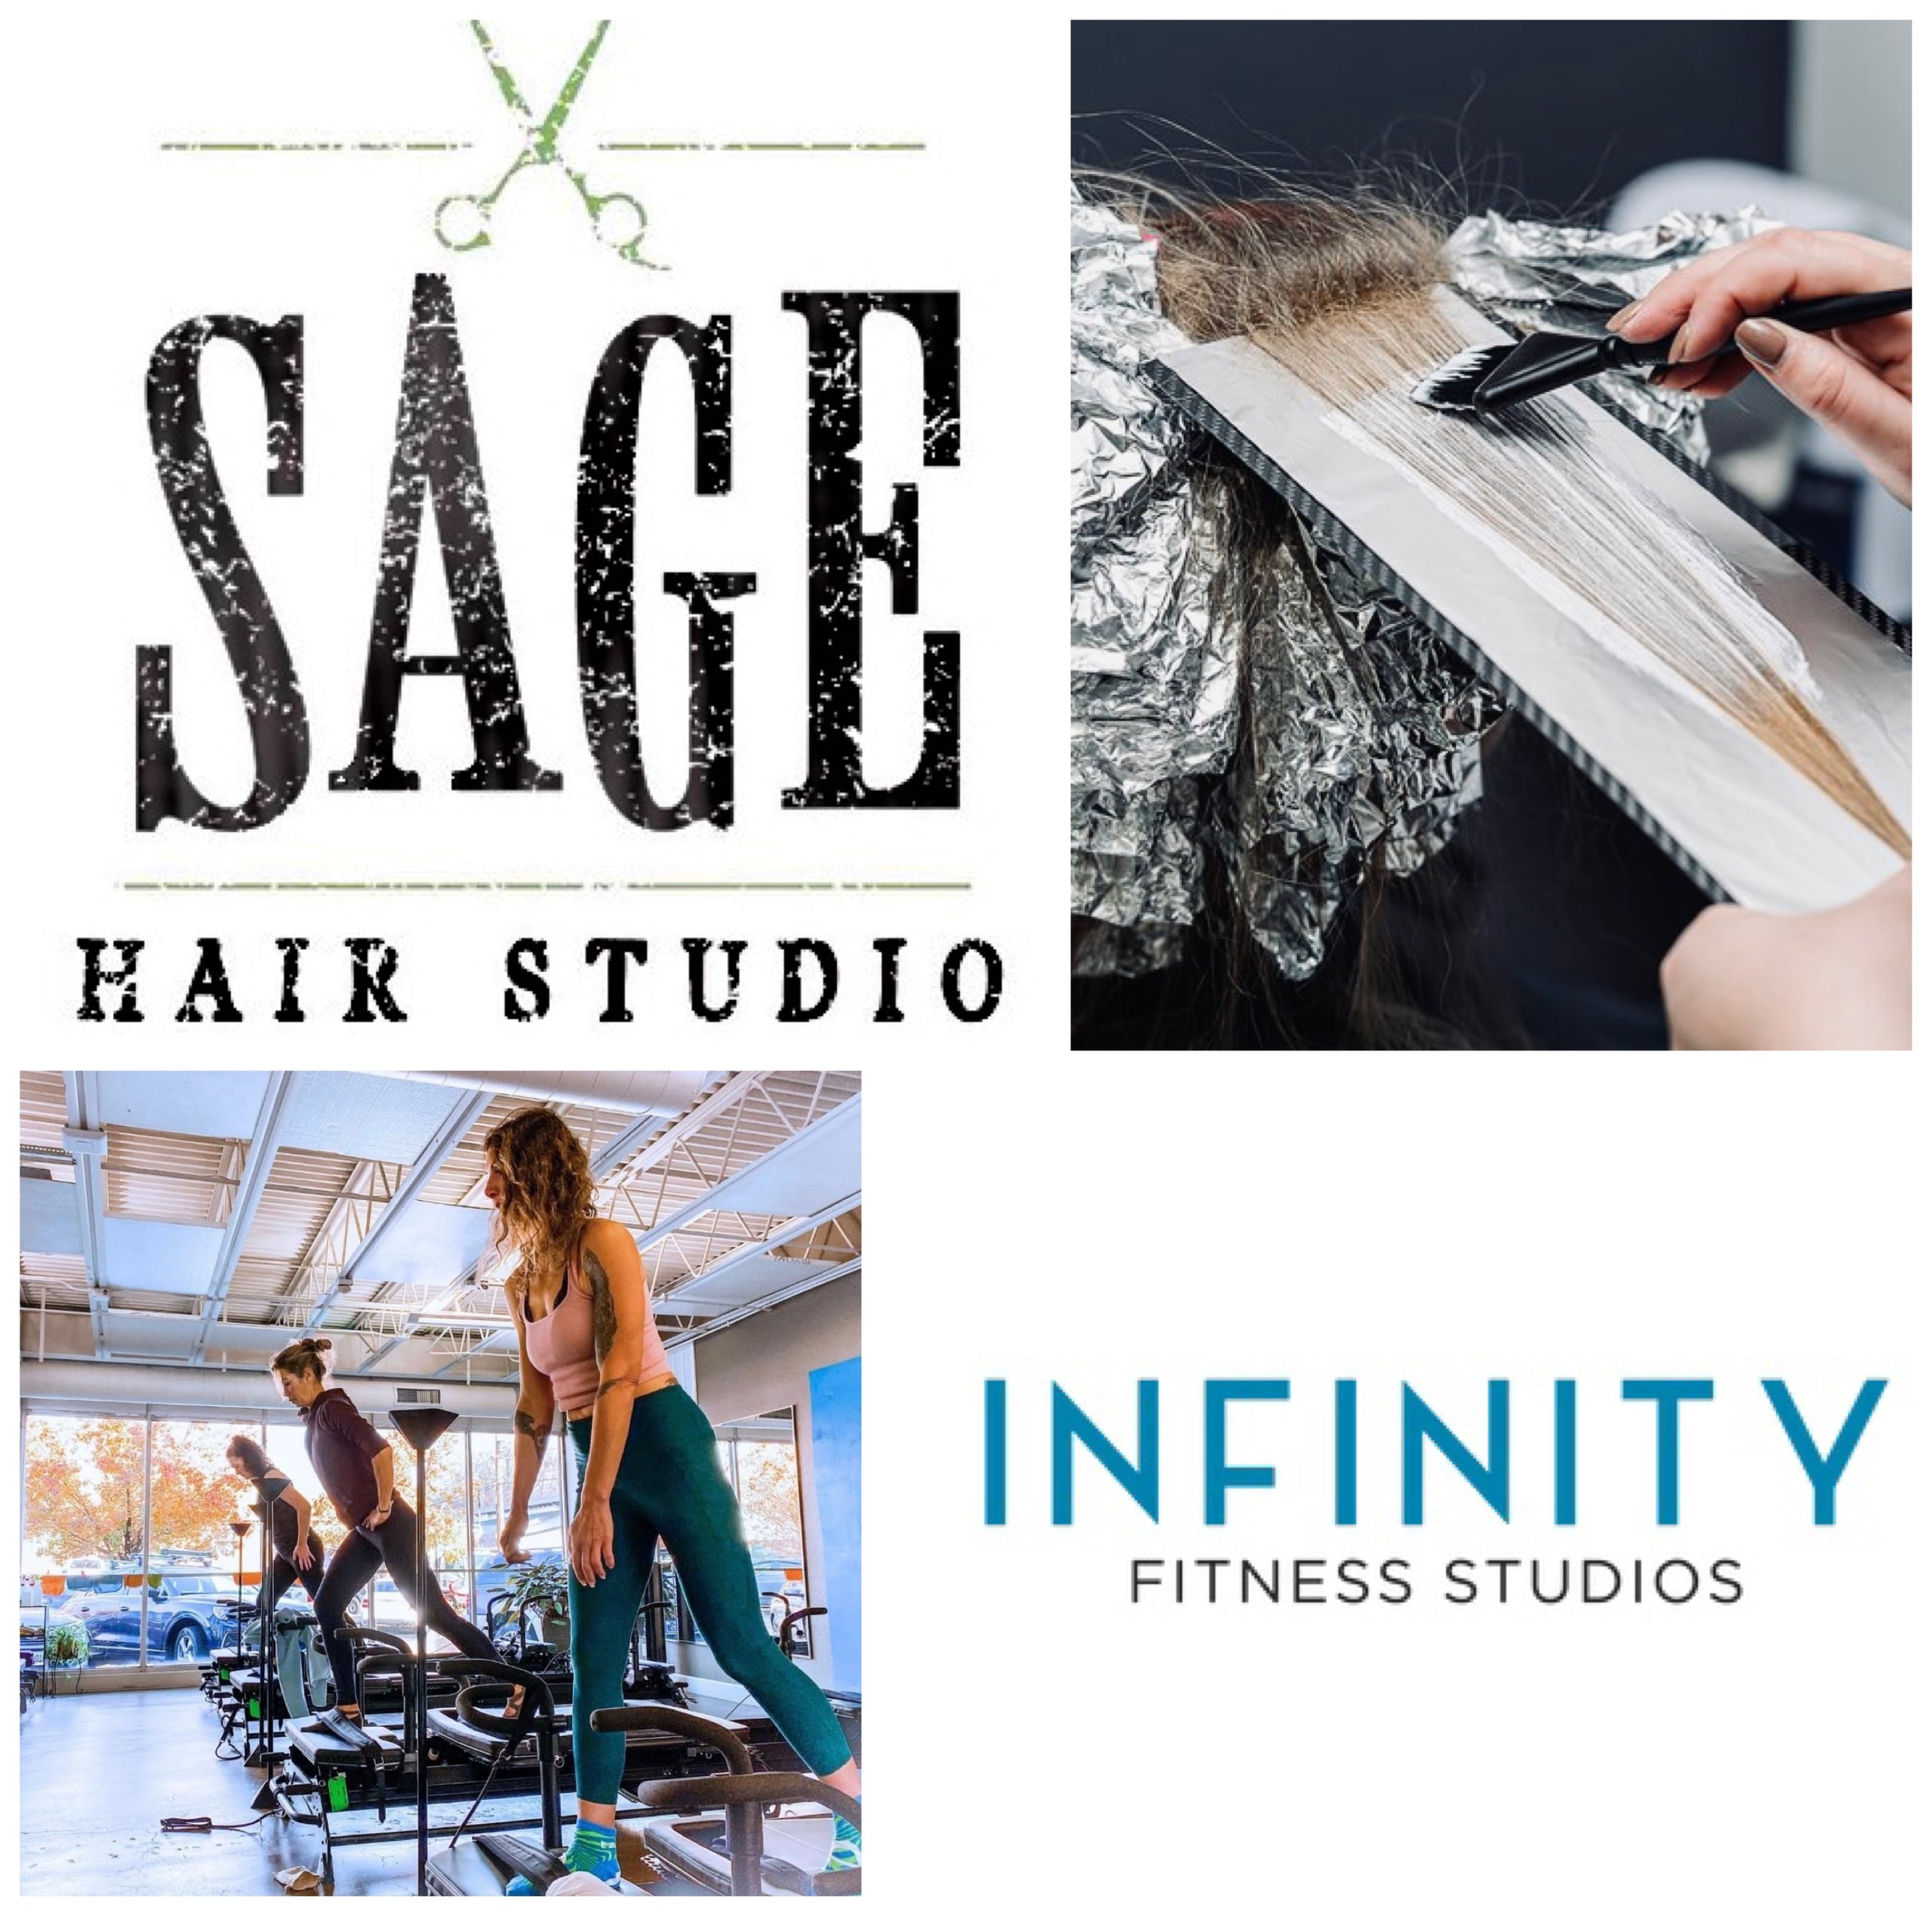 8 classes at Infinity Fitness and $100 gift certificate at Sage Hair studio